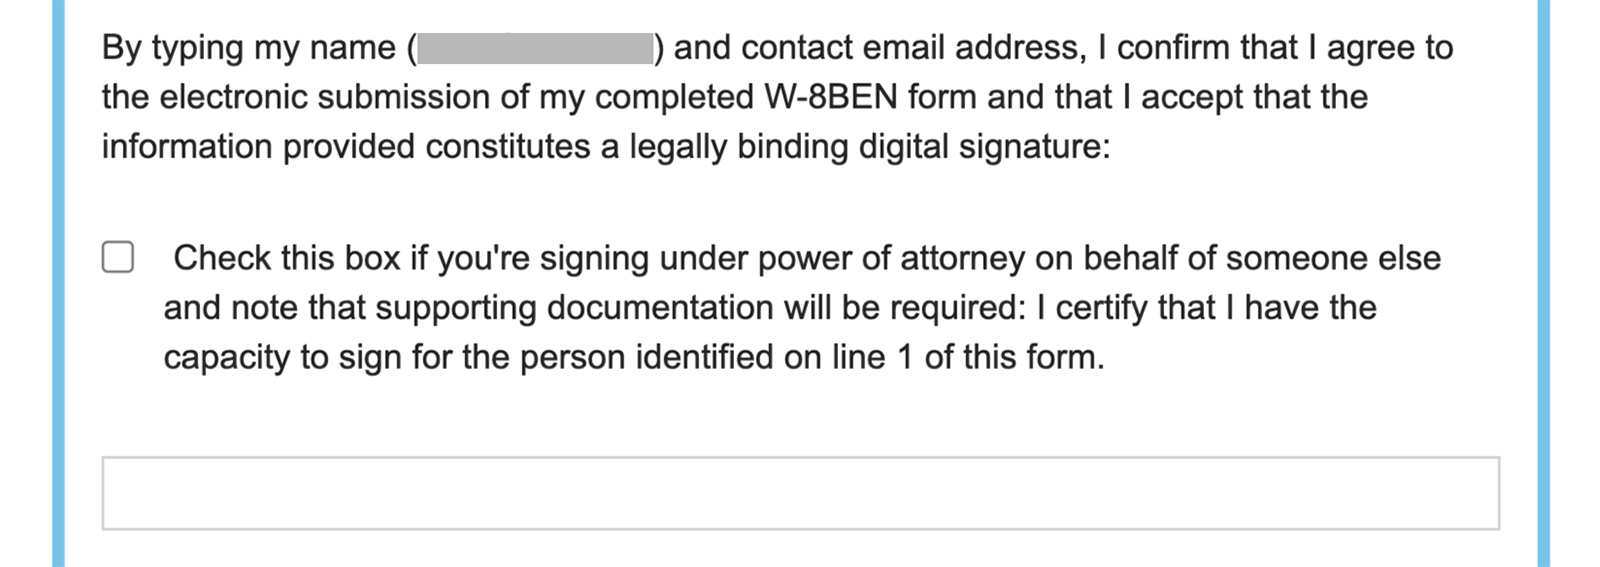 Power-of-attorney-auth.png